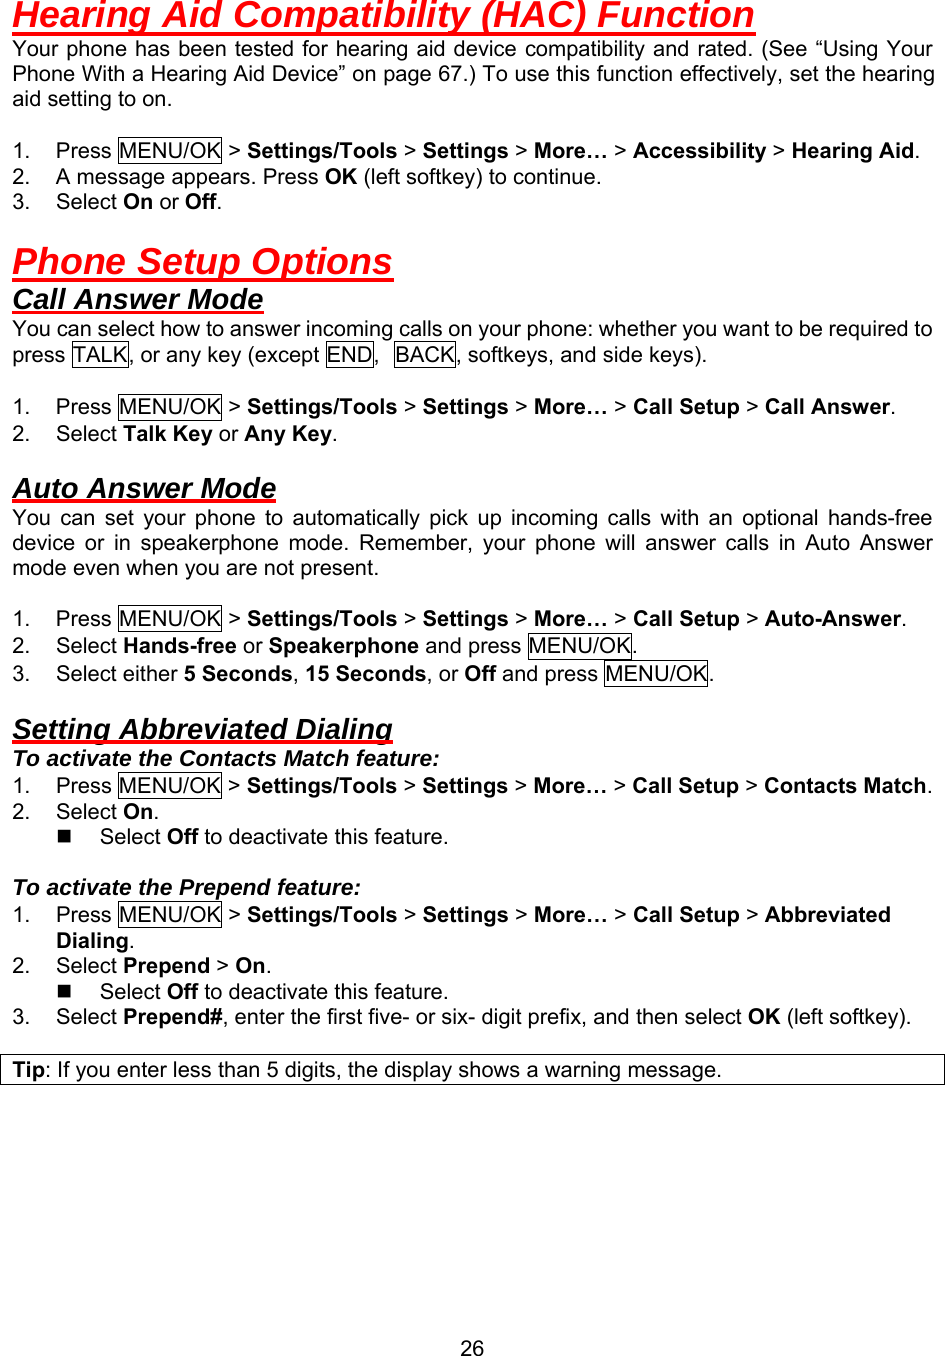  26Hearing Aid Compatibility (HAC) Function Your phone has been tested for hearing aid device compatibility and rated. (See “Using Your Phone With a Hearing Aid Device” on page 67.) To use this function effectively, set the hearing aid setting to on.  1. Press MENU/OK &gt; Settings/Tools &gt; Settings &gt; More… &gt; Accessibility &gt; Hearing Aid. 2.  A message appears. Press OK (left softkey) to continue. 3. Select On or Off.  Phone Setup Options Call Answer Mode You can select how to answer incoming calls on your phone: whether you want to be required to press TALK, or any key (except END, BACK, softkeys, and side keys).  1. Press MENU/OK &gt; Settings/Tools &gt; Settings &gt; More… &gt; Call Setup &gt; Call Answer. 2. Select Talk Key or Any Key.  Auto Answer Mode You can set your phone to automatically pick up incoming calls with an optional hands-free device or in speakerphone mode. Remember, your phone will answer calls in Auto Answer mode even when you are not present.  1. Press MENU/OK &gt; Settings/Tools &gt; Settings &gt; More… &gt; Call Setup &gt; Auto-Answer. 2. Select Hands-free or Speakerphone and press MENU/OK. 3. Select either 5 Seconds, 15 Seconds, or Off and press MENU/OK.  Setting Abbreviated Dialing To activate the Contacts Match feature: 1. Press MENU/OK &gt; Settings/Tools &gt; Settings &gt; More… &gt; Call Setup &gt; Contacts Match. 2. Select On.   Select Off to deactivate this feature.  To activate the Prepend feature: 1. Press MENU/OK &gt; Settings/Tools &gt; Settings &gt; More… &gt; Call Setup &gt; Abbreviated Dialing. 2. Select Prepend &gt; On.   Select Off to deactivate this feature. 3. Select Prepend#, enter the first five- or six- digit prefix, and then select OK (left softkey).  Tip: If you enter less than 5 digits, the display shows a warning message.  